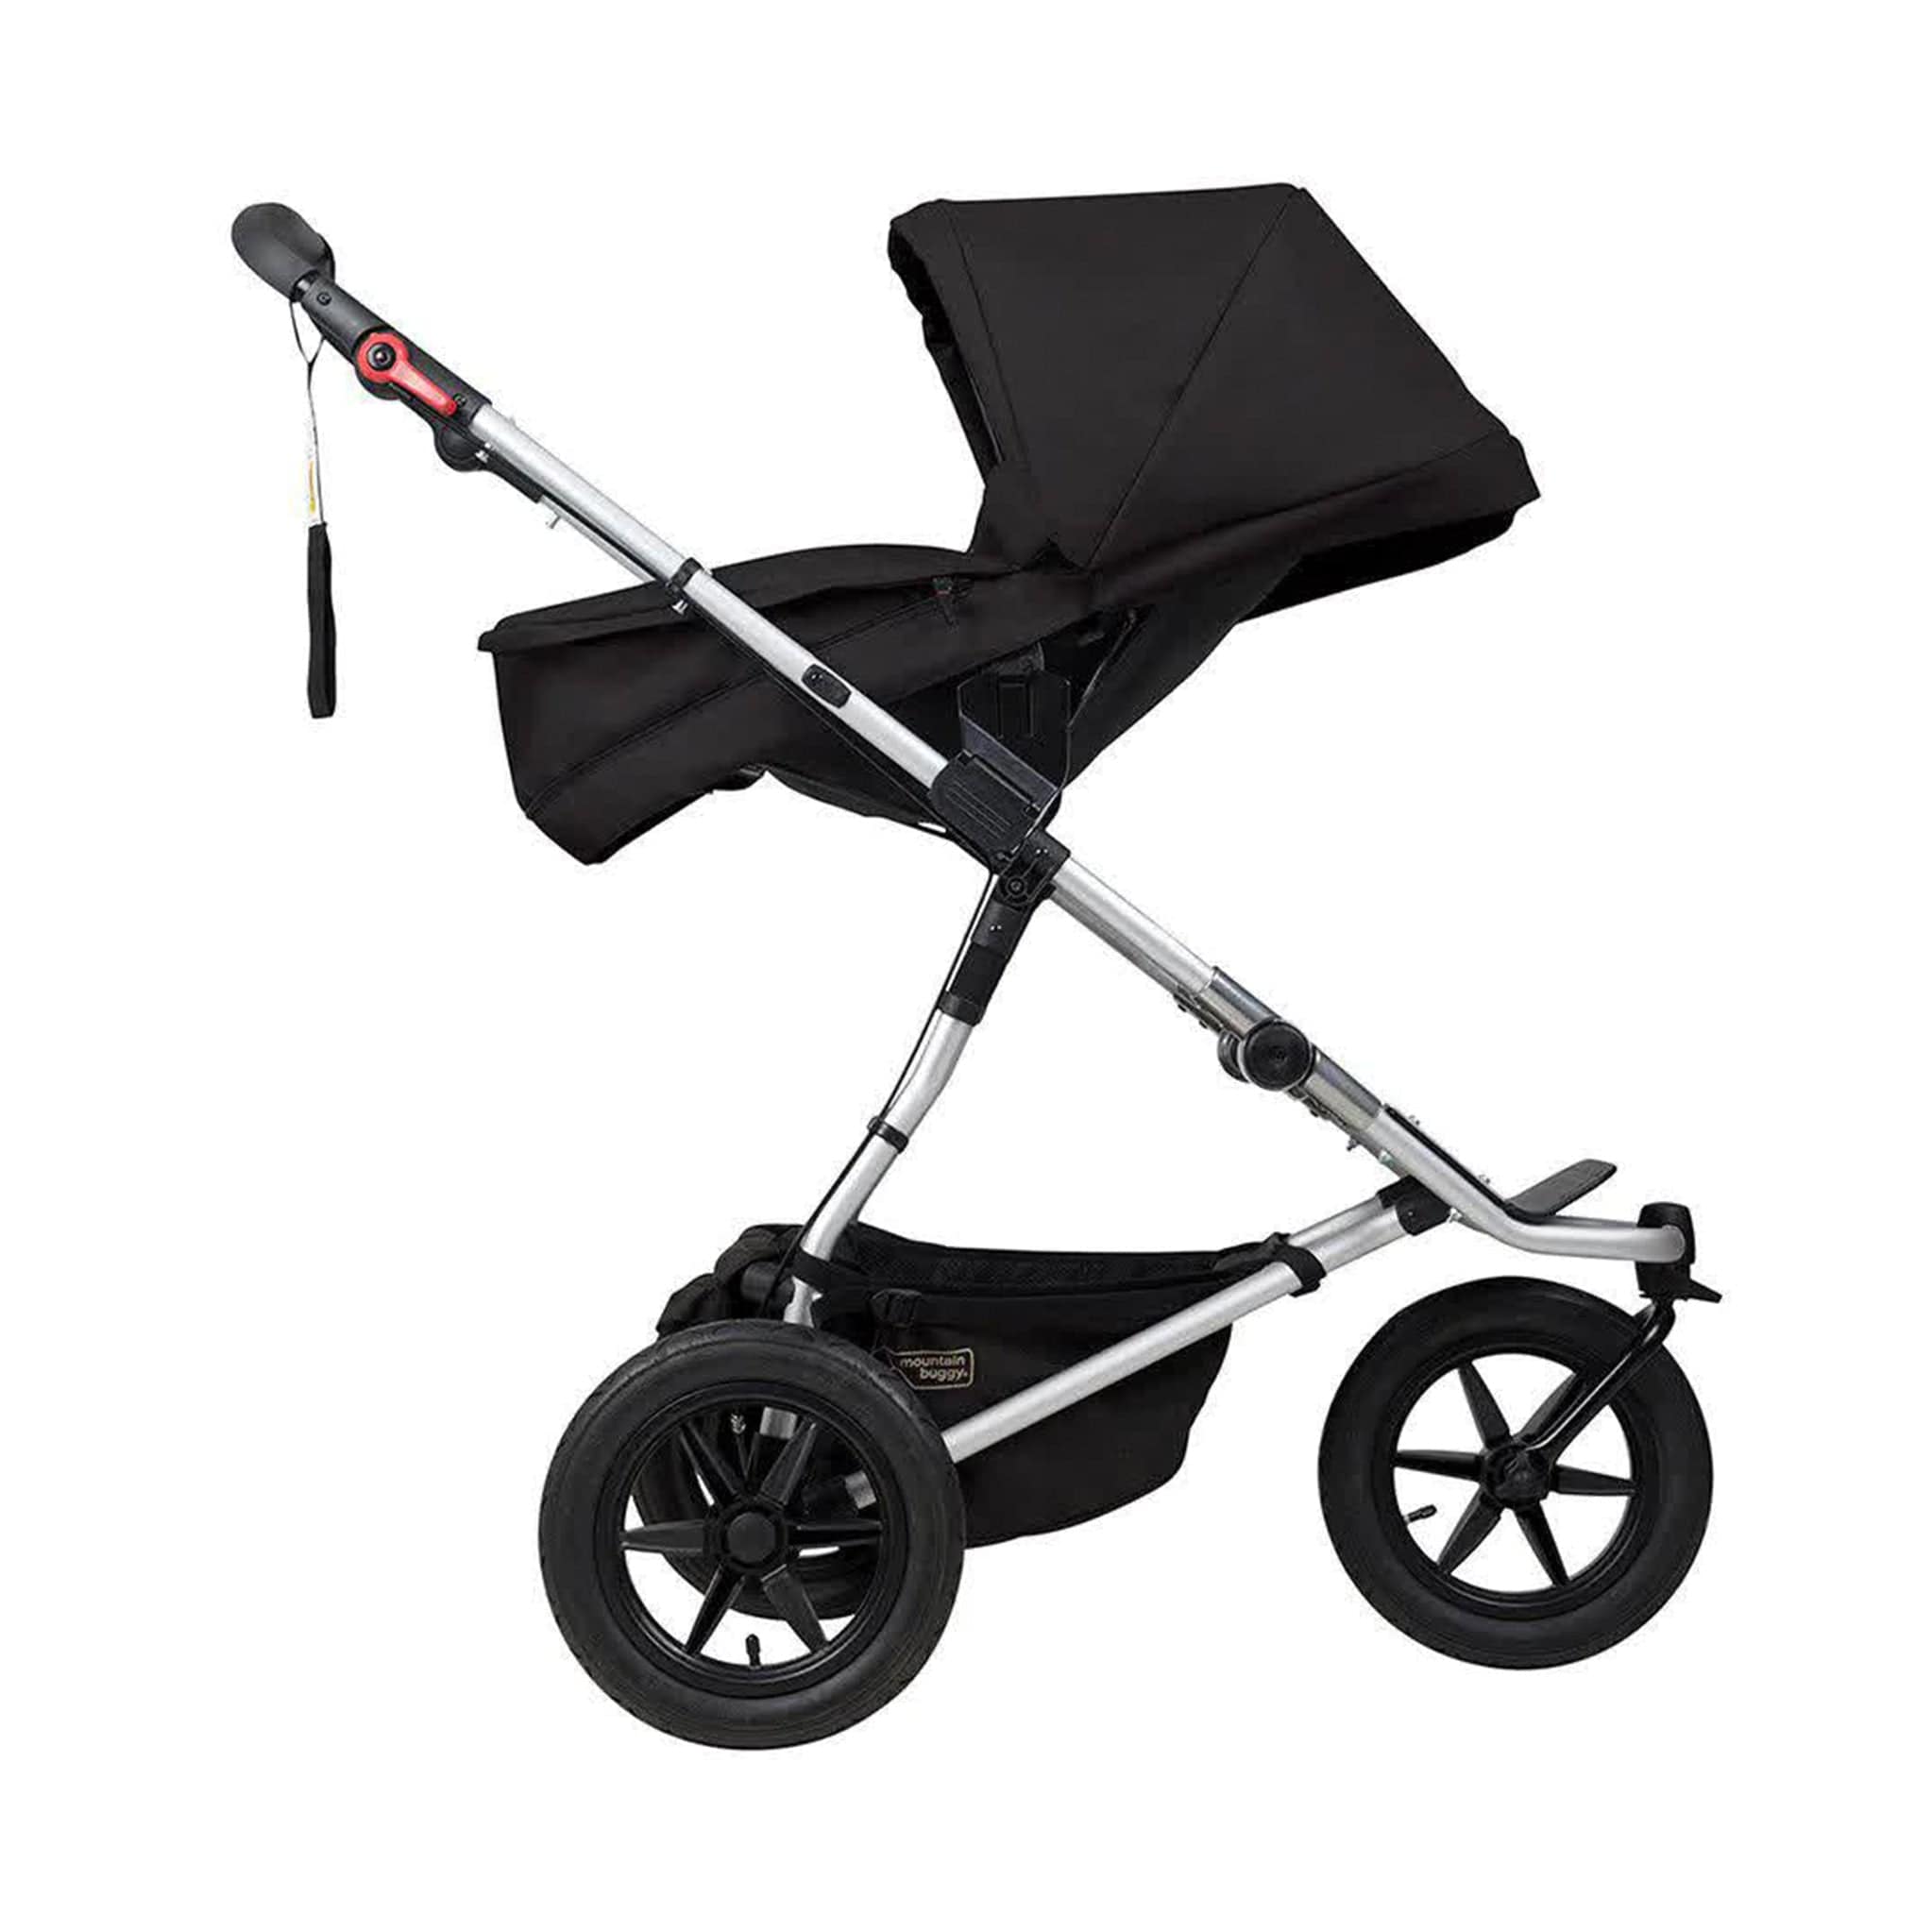 Mountain Buggy Jungle/Terrain Plus Carrycot Black Chassis & Carrycots CCPU-V3.2-55 9420015745788